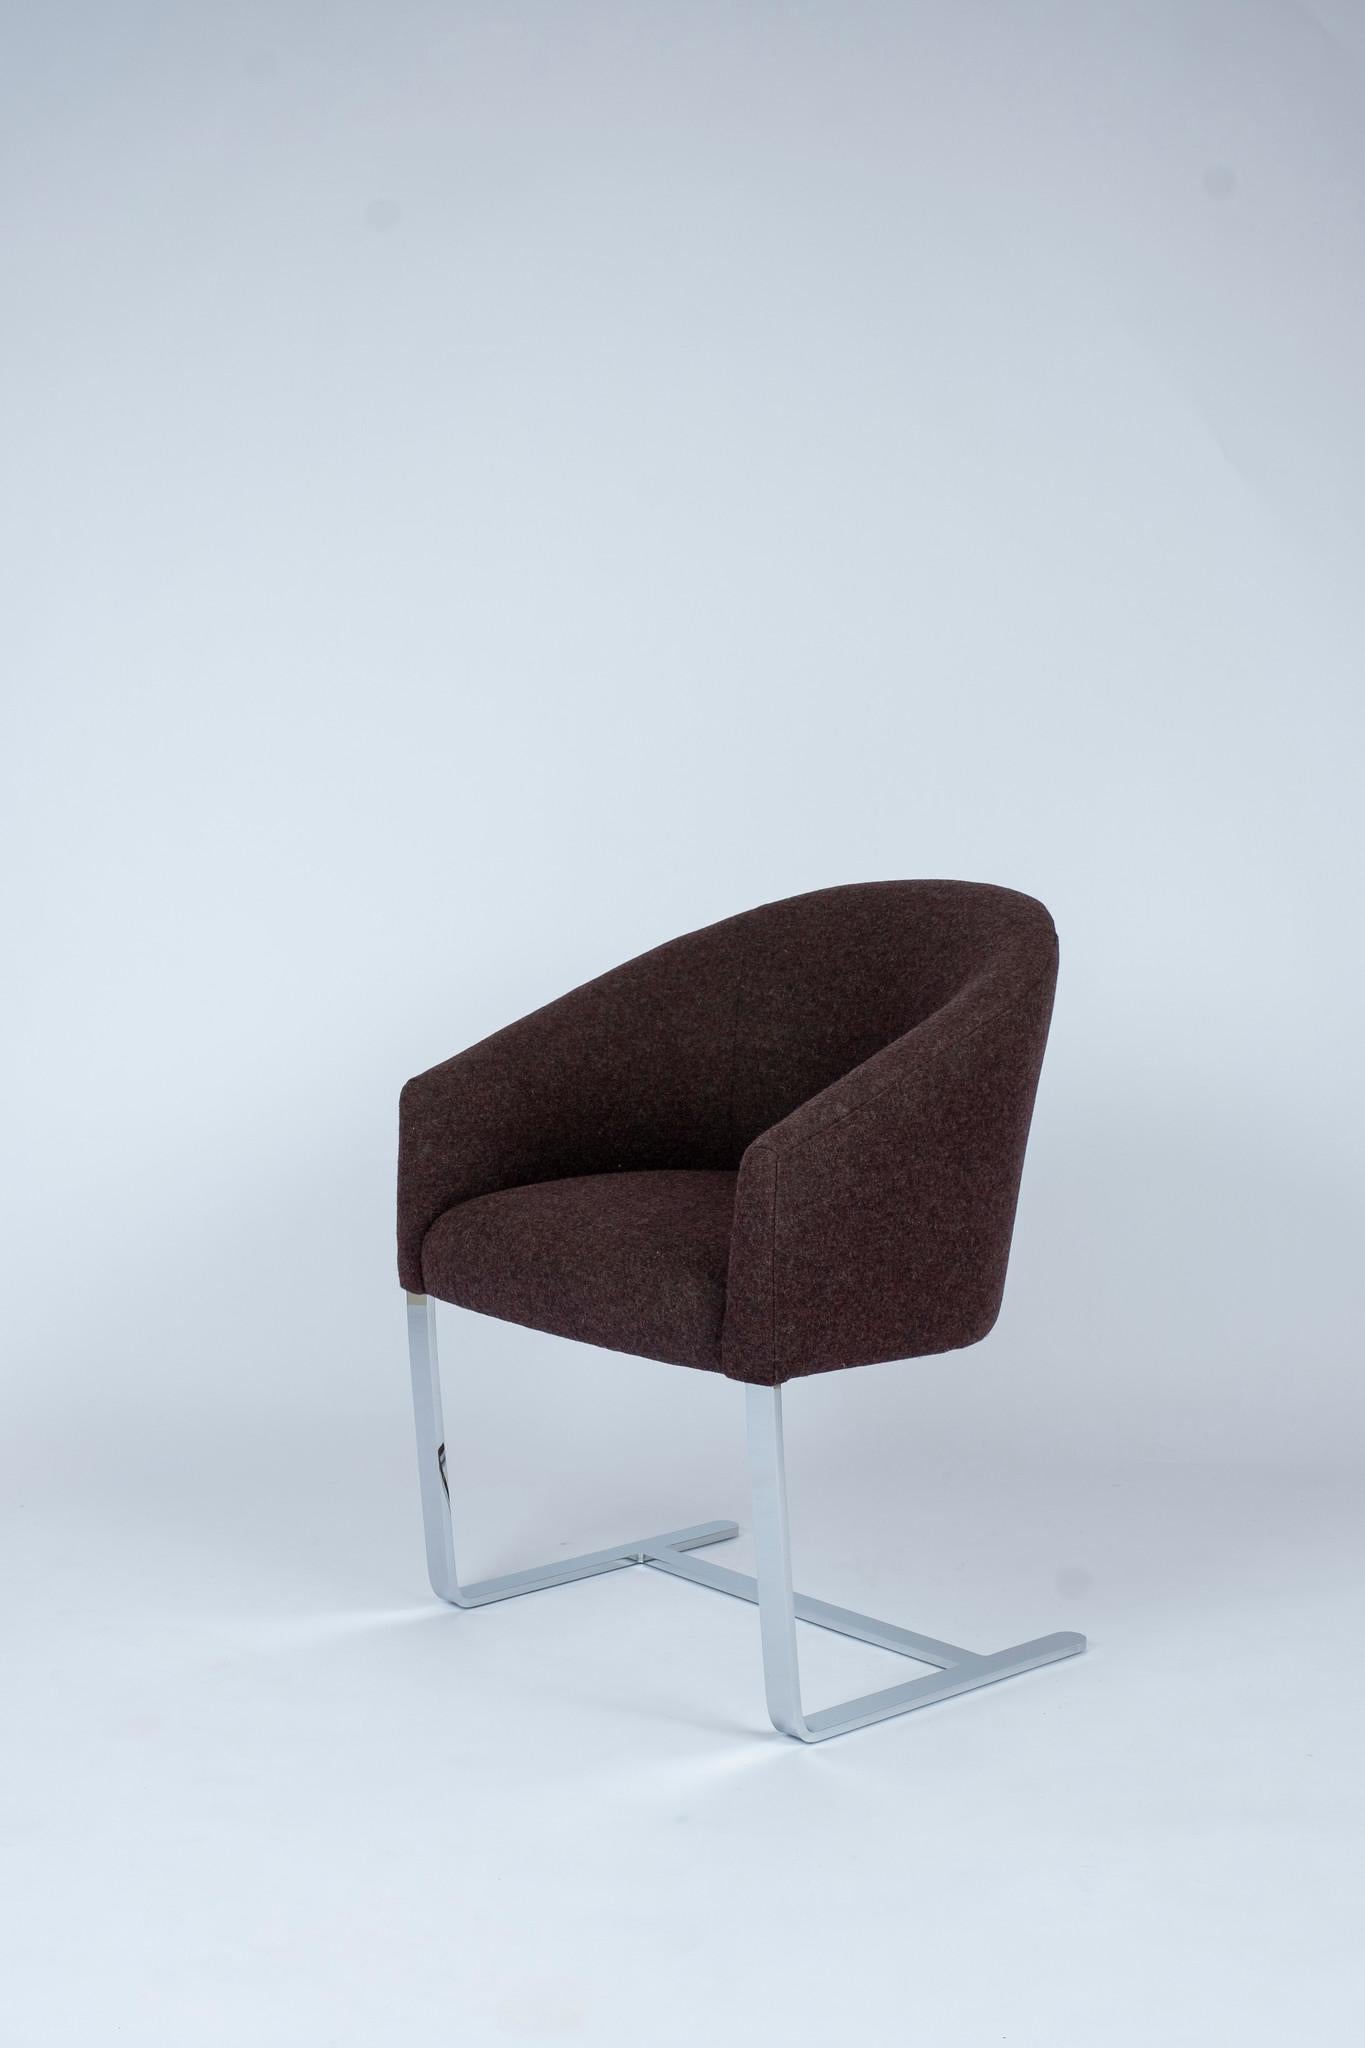 Claret wine felt wool style upholstered chair with tub-shaped tight back and seat cantilevered on a polished chromed steel base.